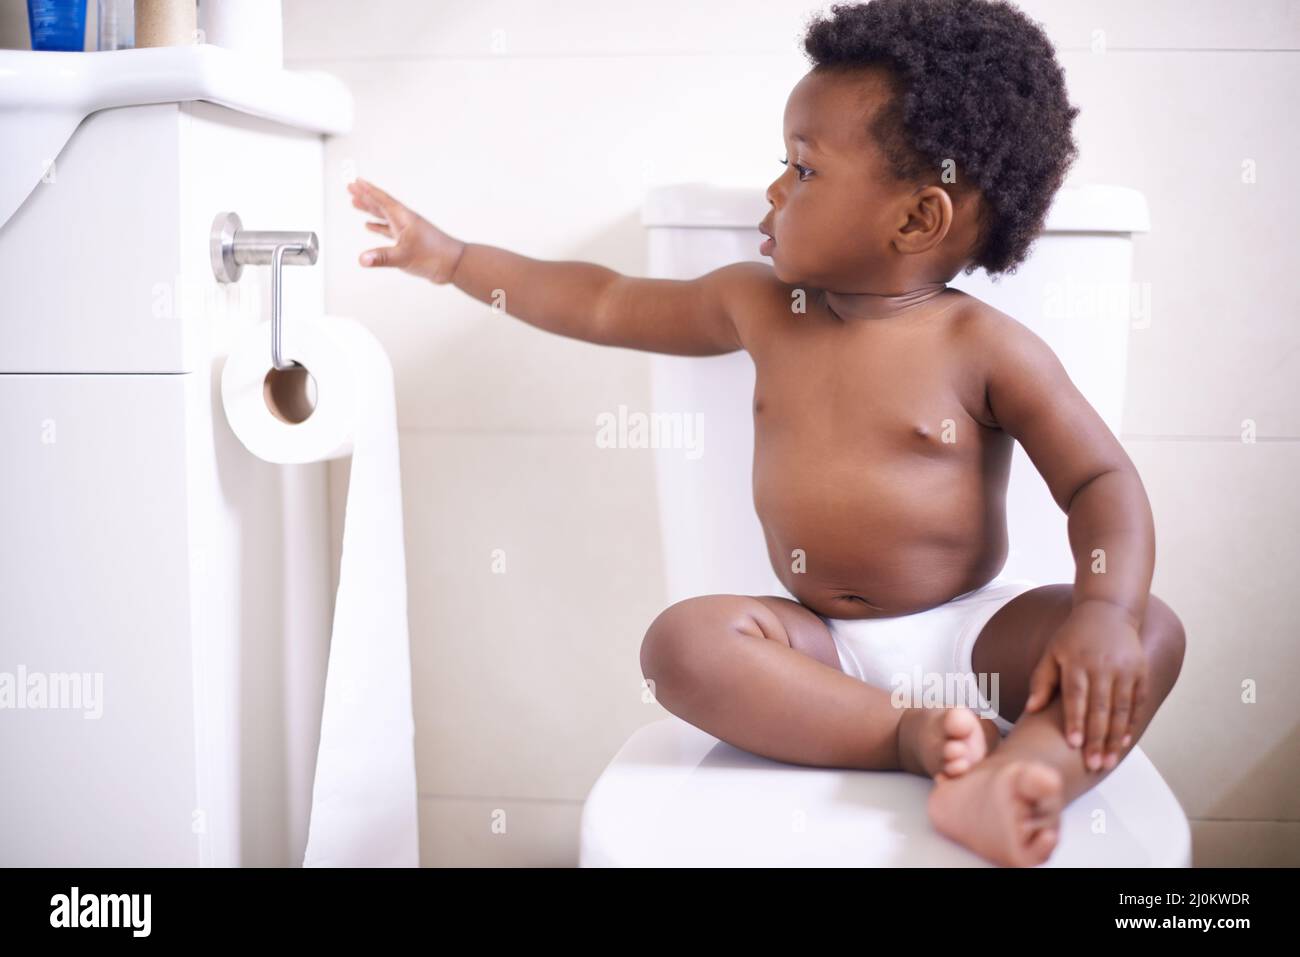 Potty training 101 Always make sure you have enough toilet paper. Shot of a baby boy sitting on the toilet and reaching for the toilet paper. Stock Photo